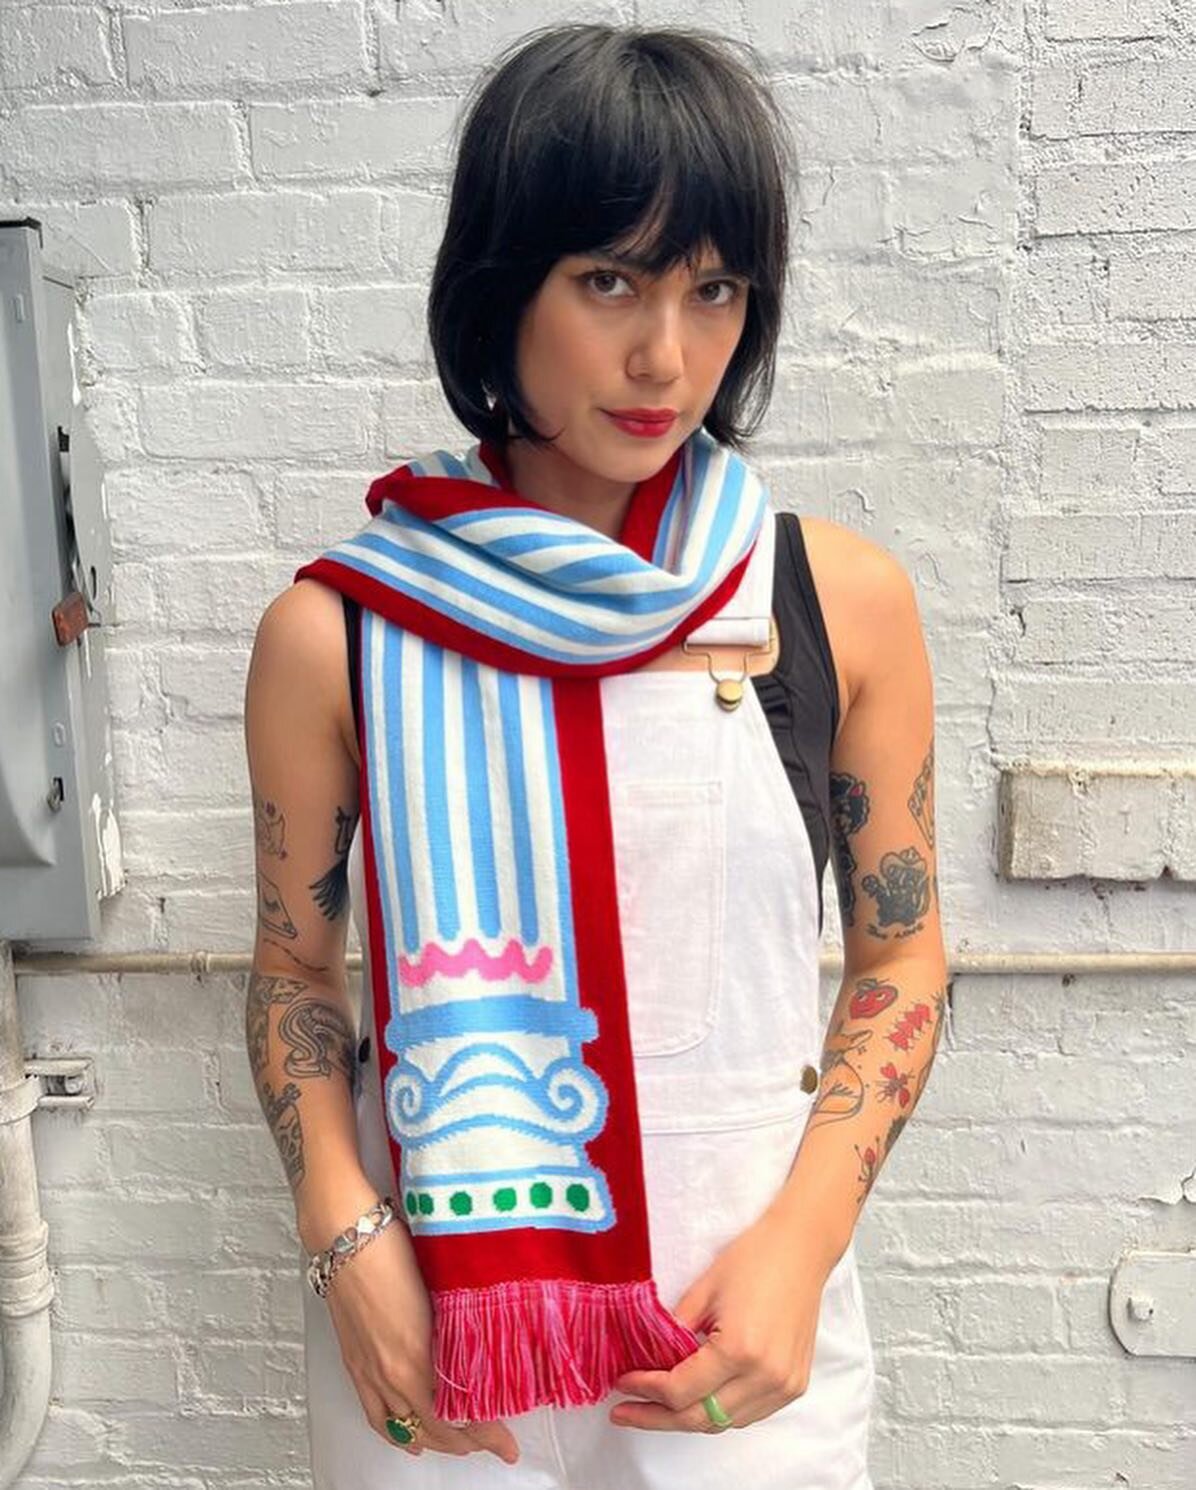 Very excited to have my scarves stocked with the wonderful @nooworks in 🇺🇸 be quick if you&rsquo;re stateside as they&rsquo;re selling super fast 💨 I&rsquo;ve sold out but there&rsquo;s a preorder on my website for delivery in mid Jan if you misse